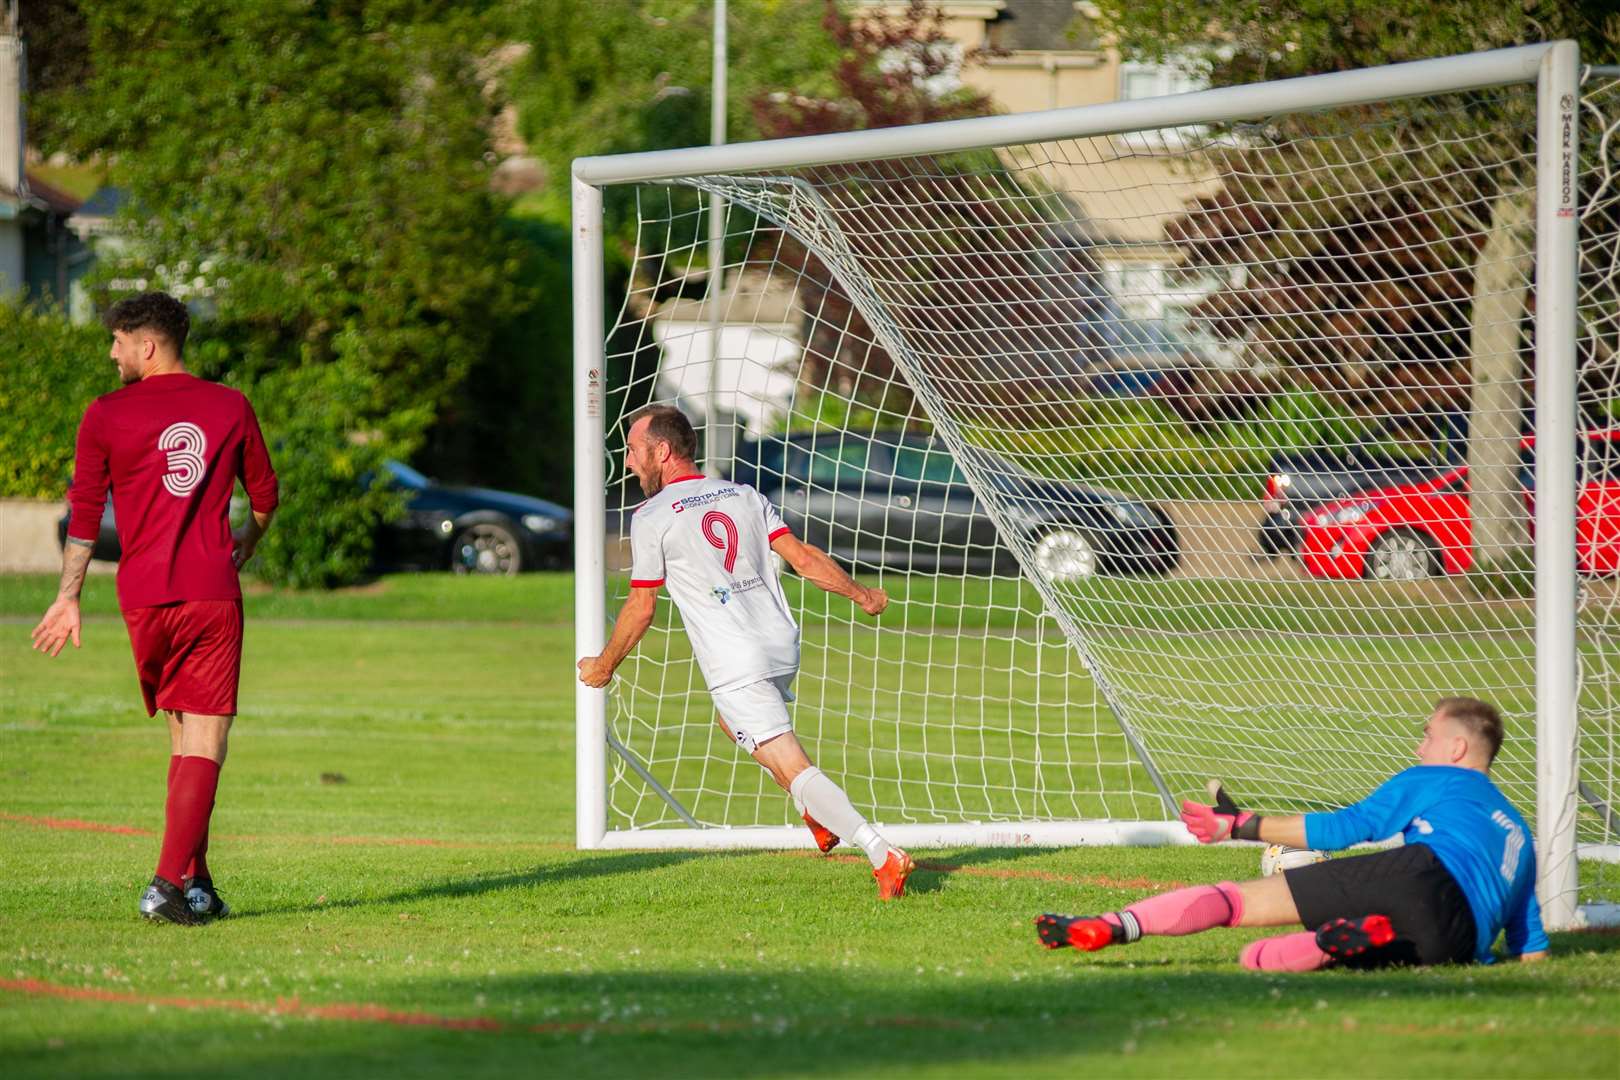 Carisbrooke's Ricky Wardrop scores the only goal of the match past Westerlea's Kyle Mallinson...Carisbrooke FC (1) vs Westerlea FC (0) - Top Car Cup Final - Roysvale, Forres 16/07/2021...Picture: Daniel Forsyth..